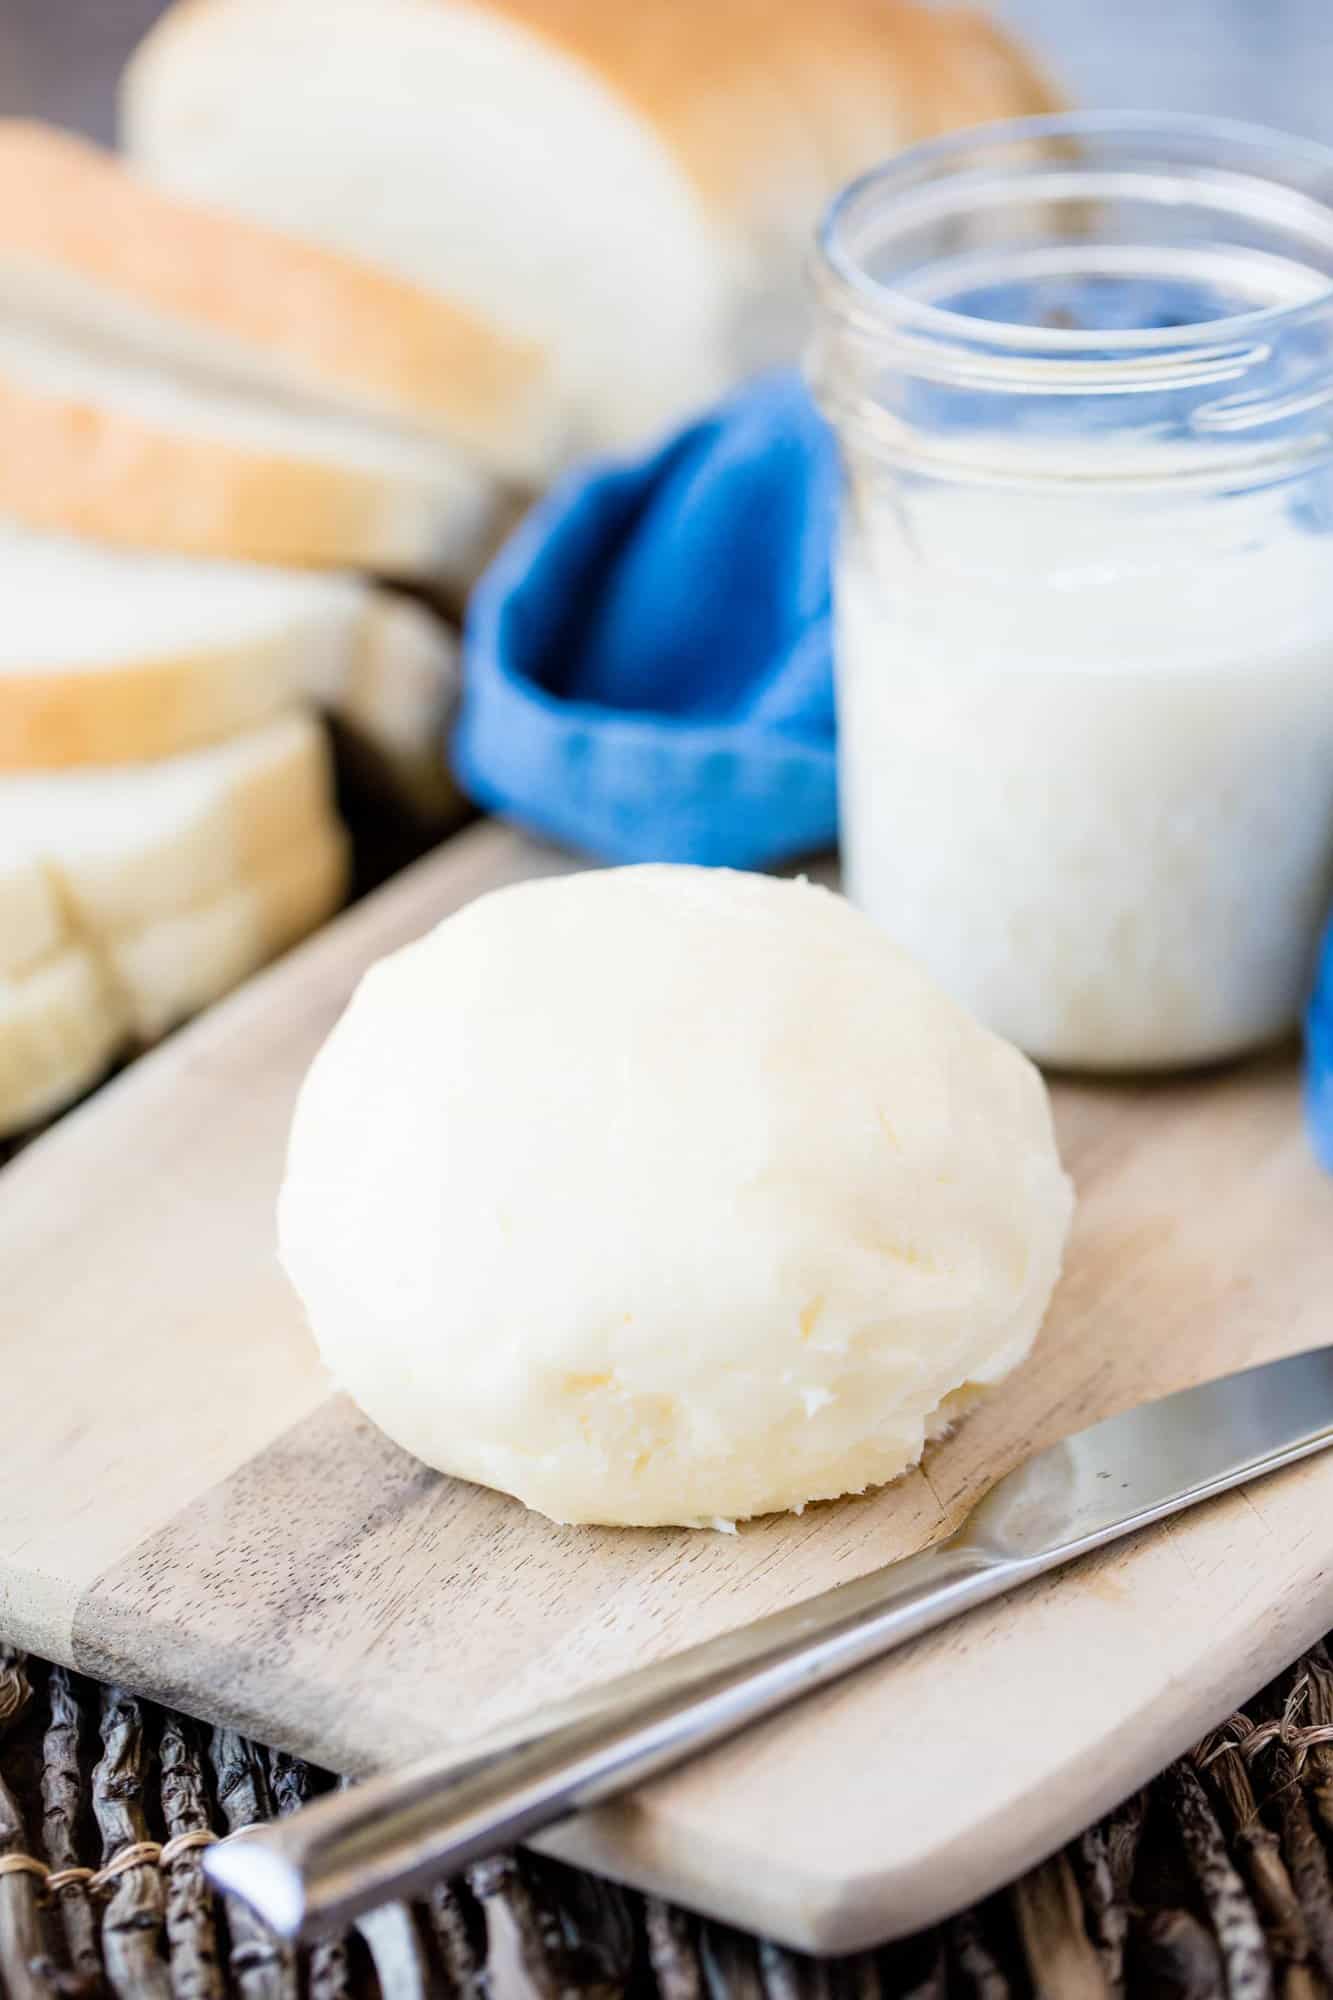 A ball of homemade butter on a cutting board with a butter knife and a jar of cream in the background